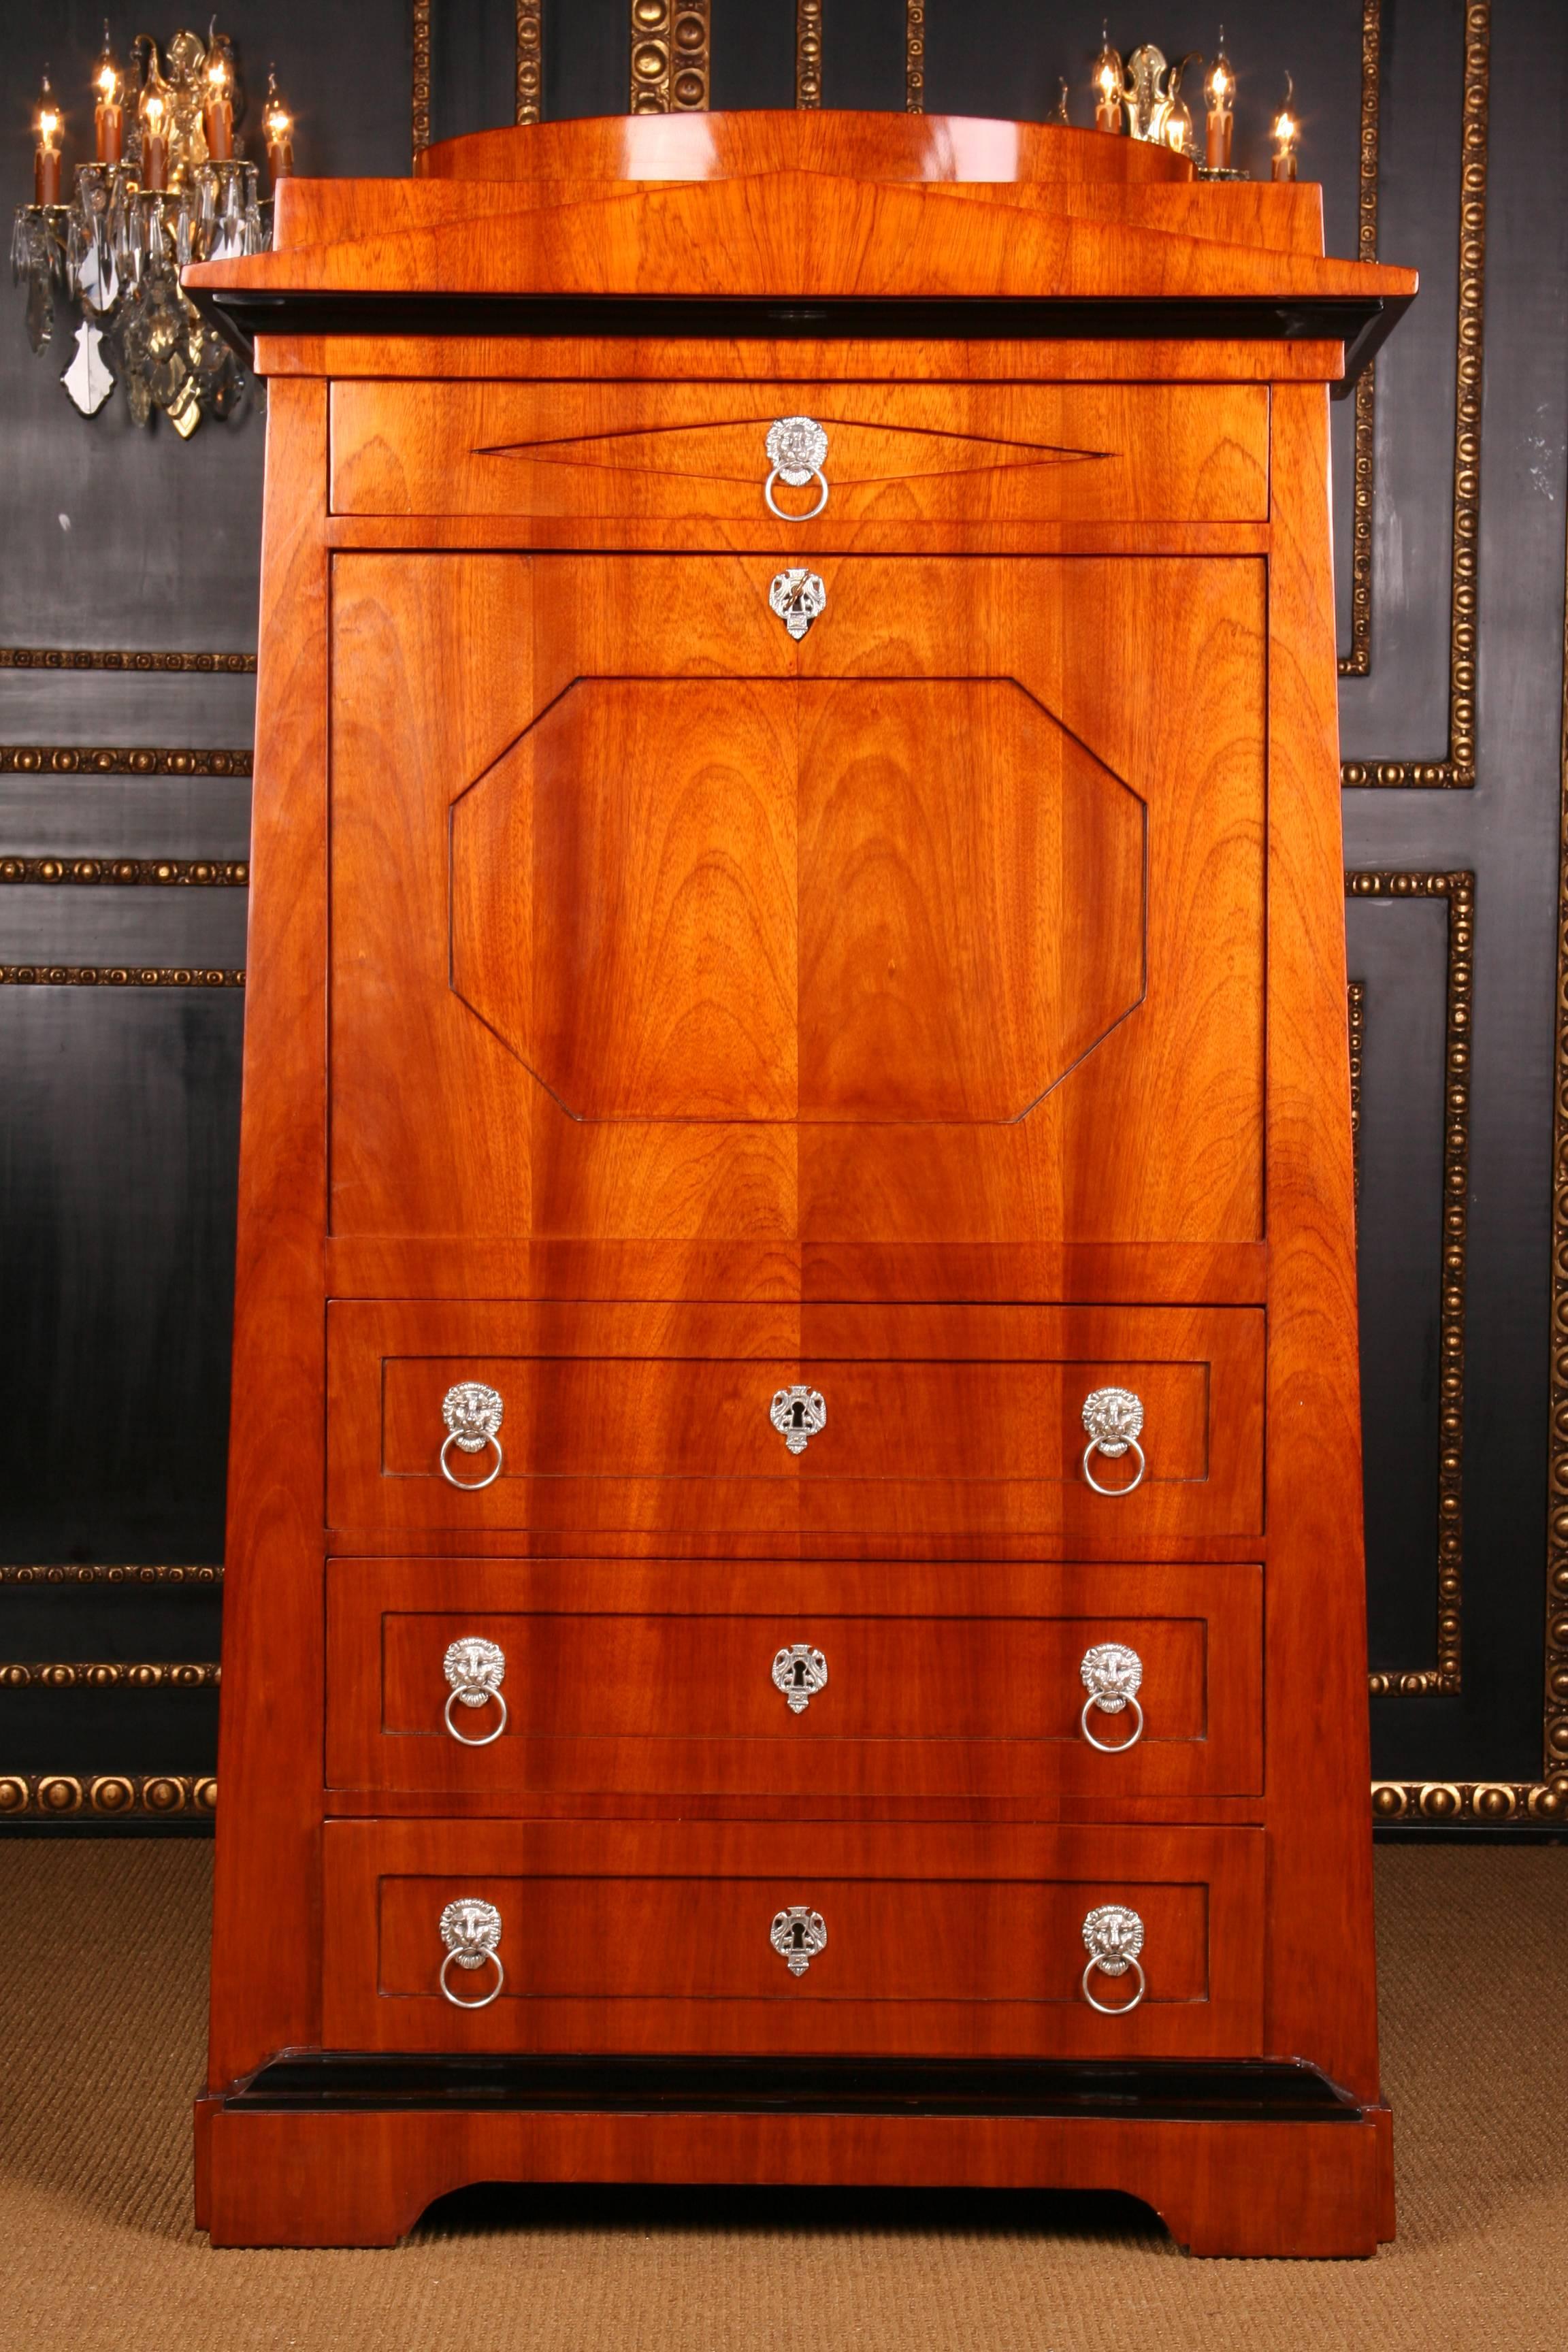 High quality rosewood veneer on solid conifers. Conical body on profile frames. Base in the front, between four drawers, straight flap with shield-shaped filling. Behind it is a richly divided compartmental division of a bent temple-shaped central